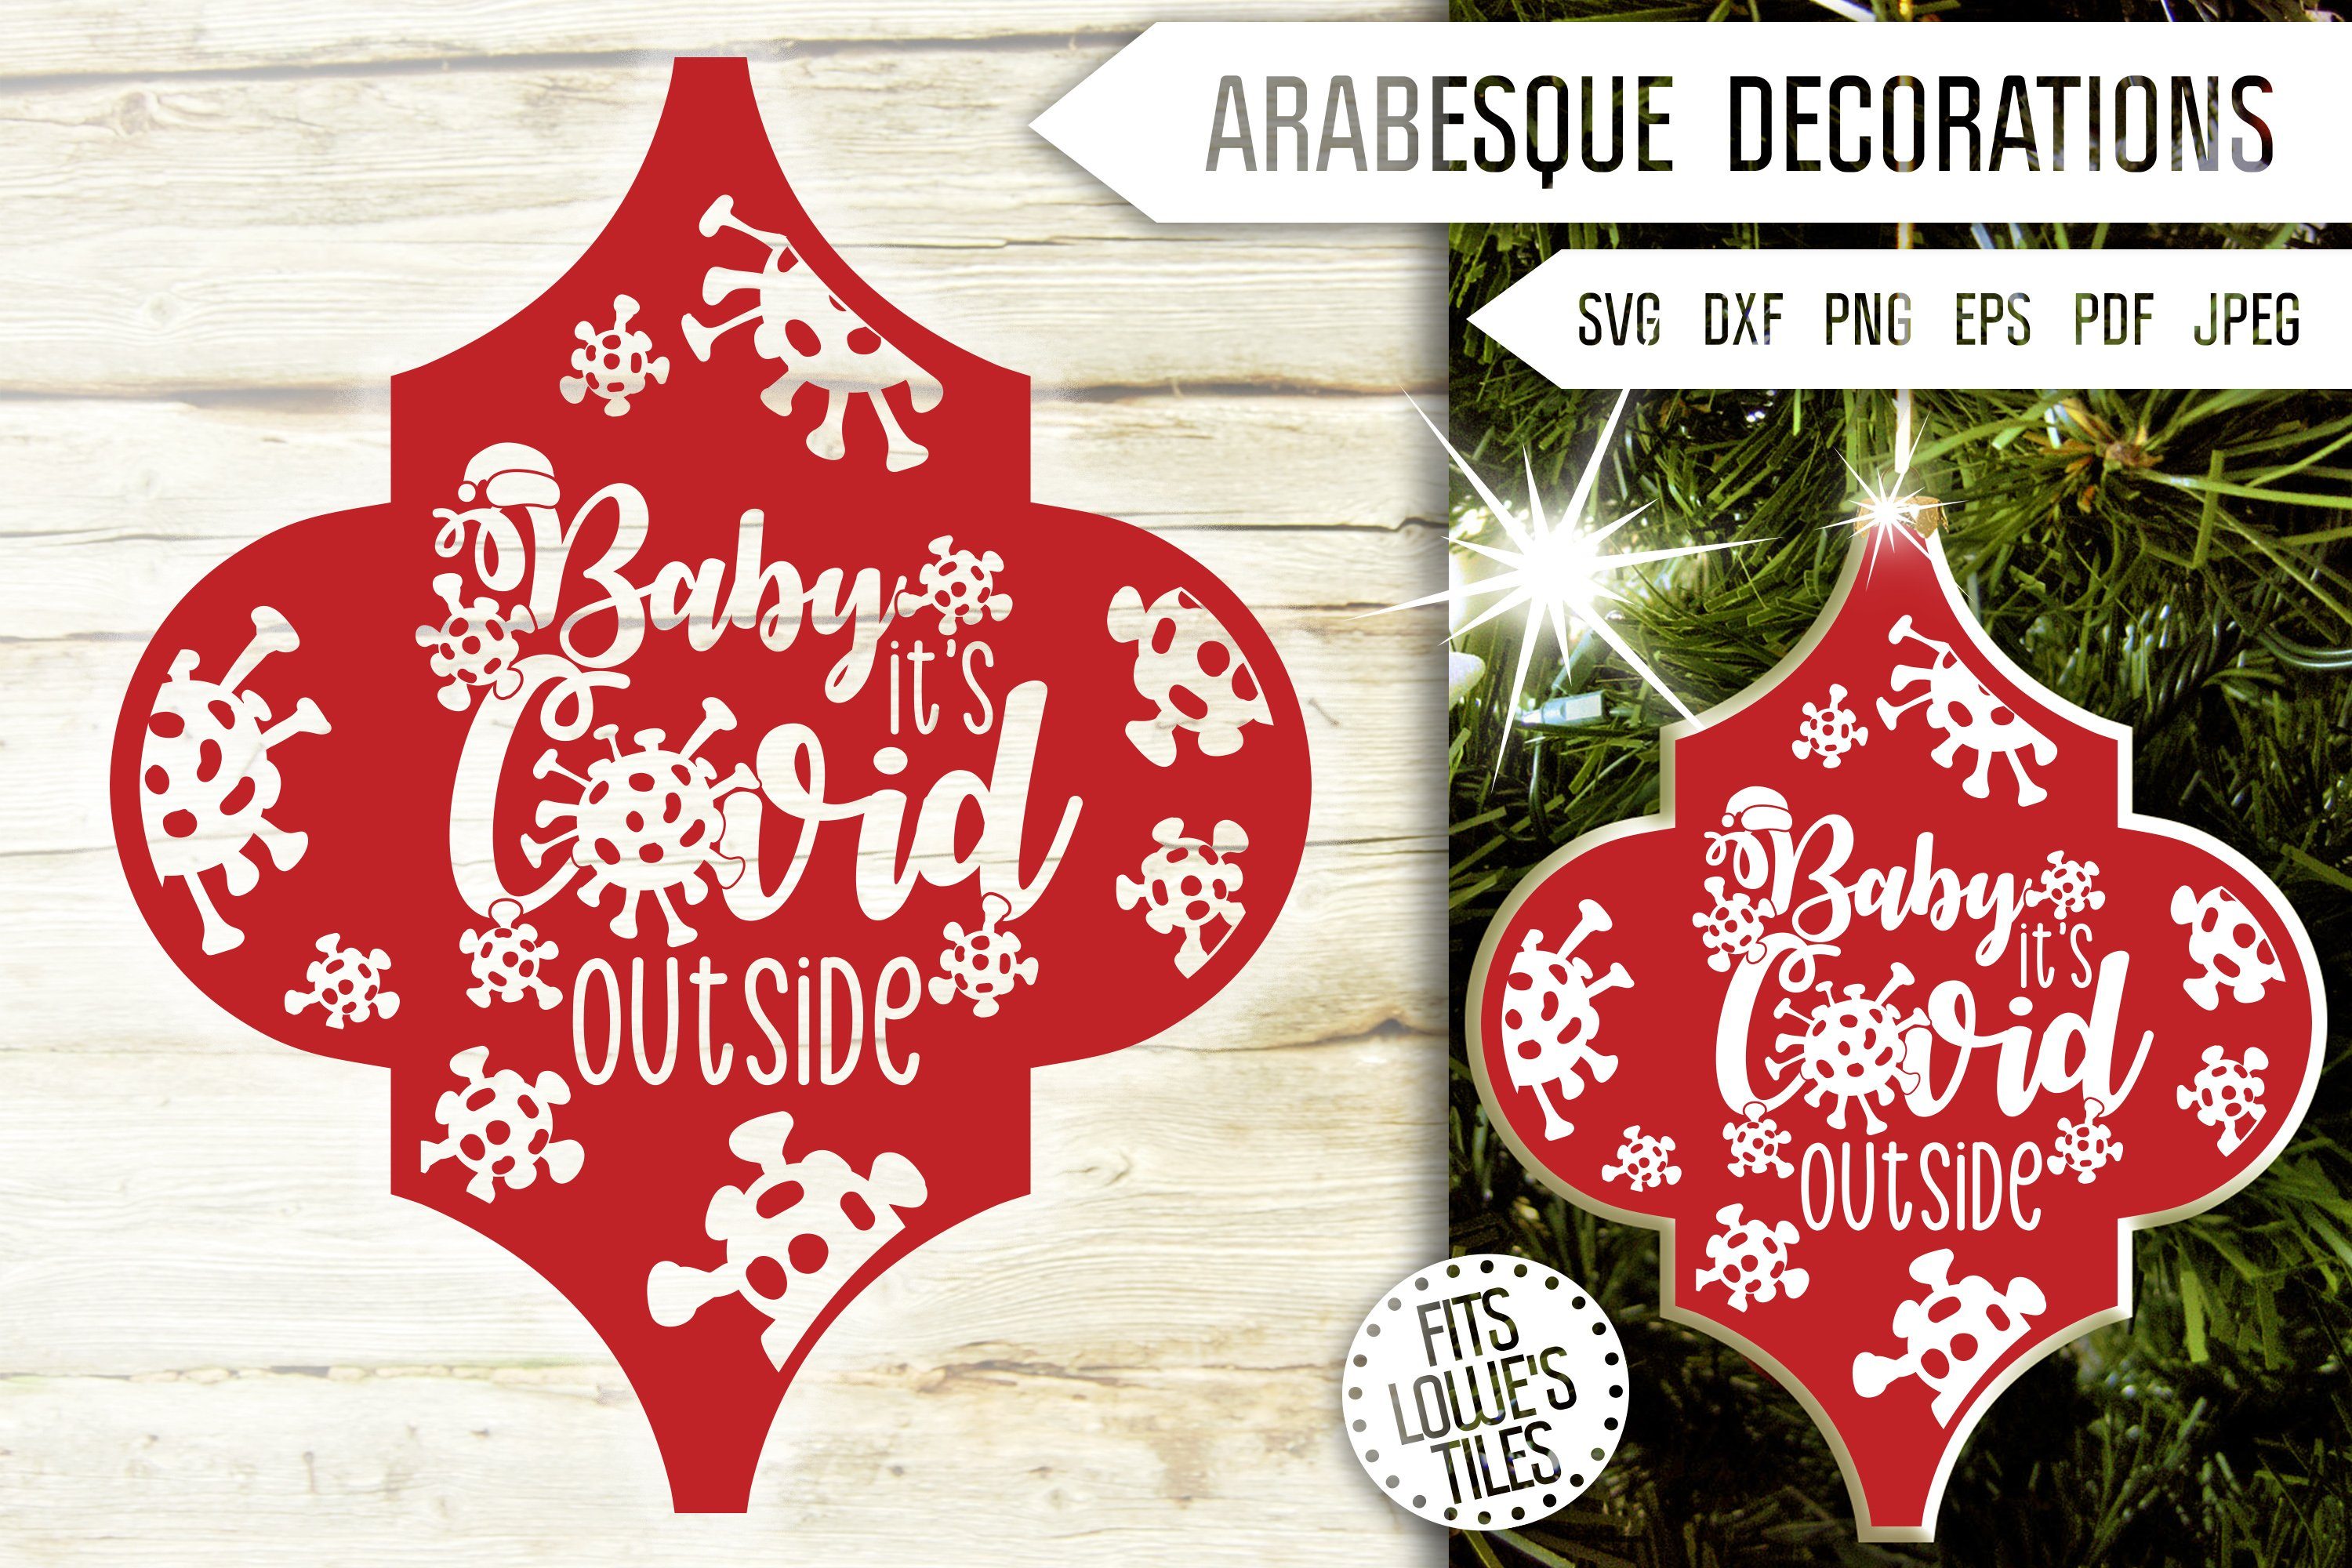 Download Arabesque Baby It S Covid Outside Svg Arabesque Svg Arabesque Ornaments Svg Lowe S Tile Svg Quarantine Svg Covid Dxf Eps Png Jpg Pdf So Fontsy